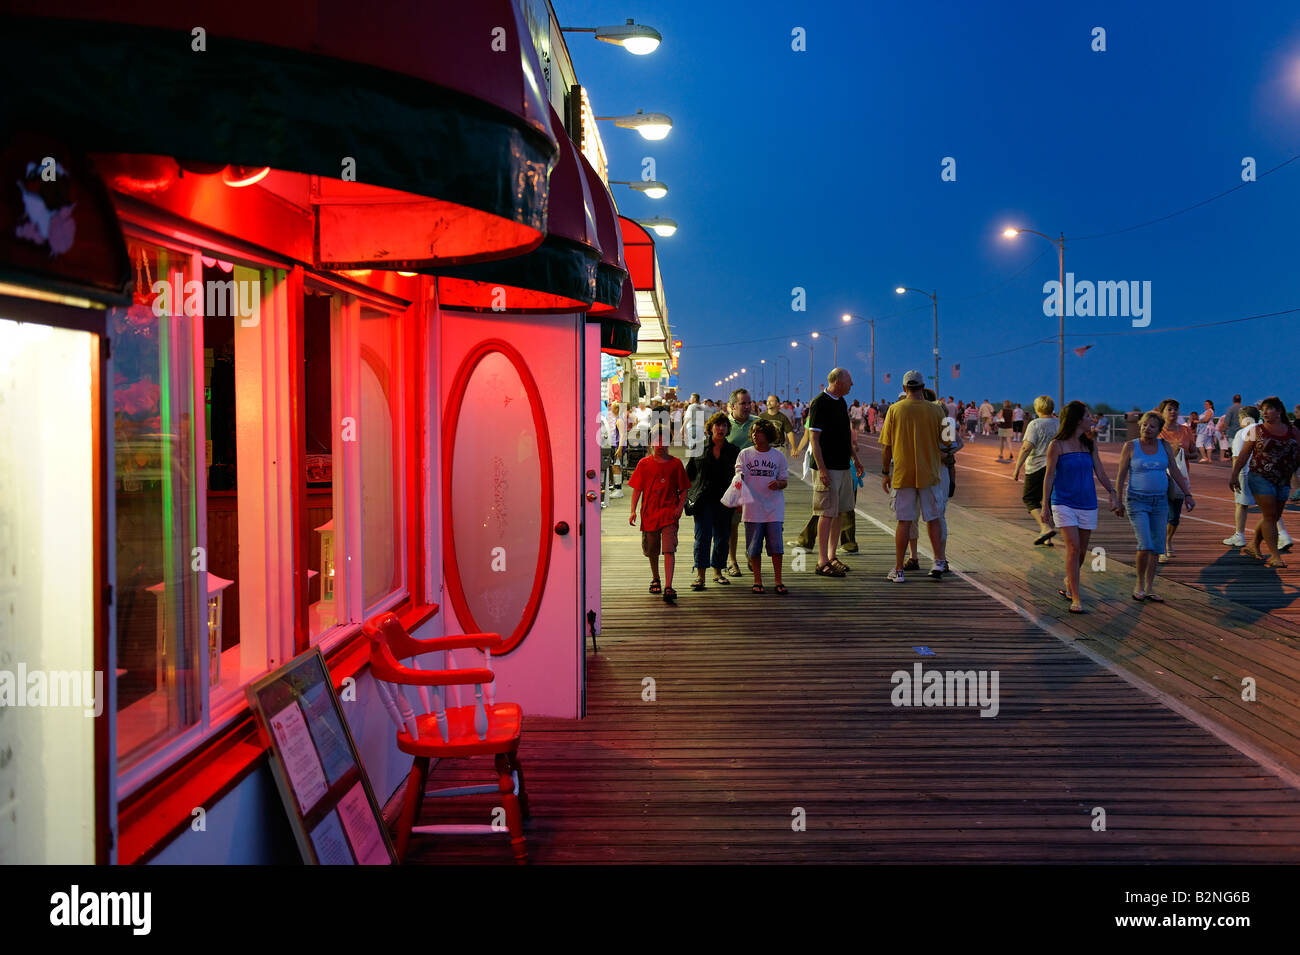 Vacationers strolling along the boardwalk at night Stock Photo